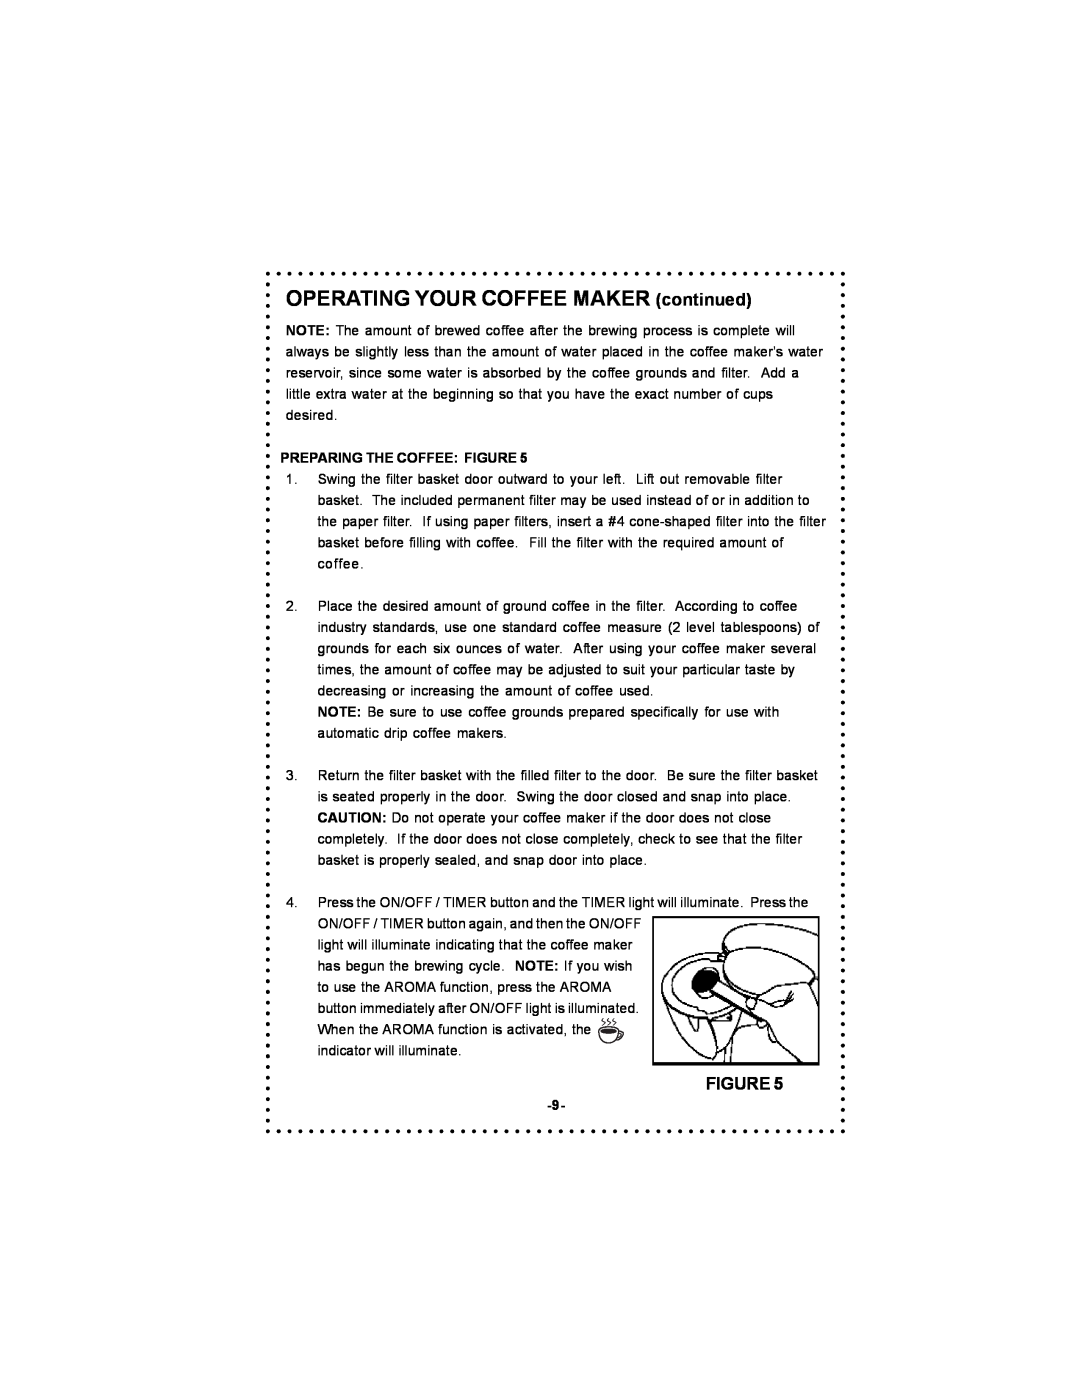 DeLonghi DC56T instruction manual OPERATING YOUR COFFEE MAKER continued, Preparing The Coffee Figure 